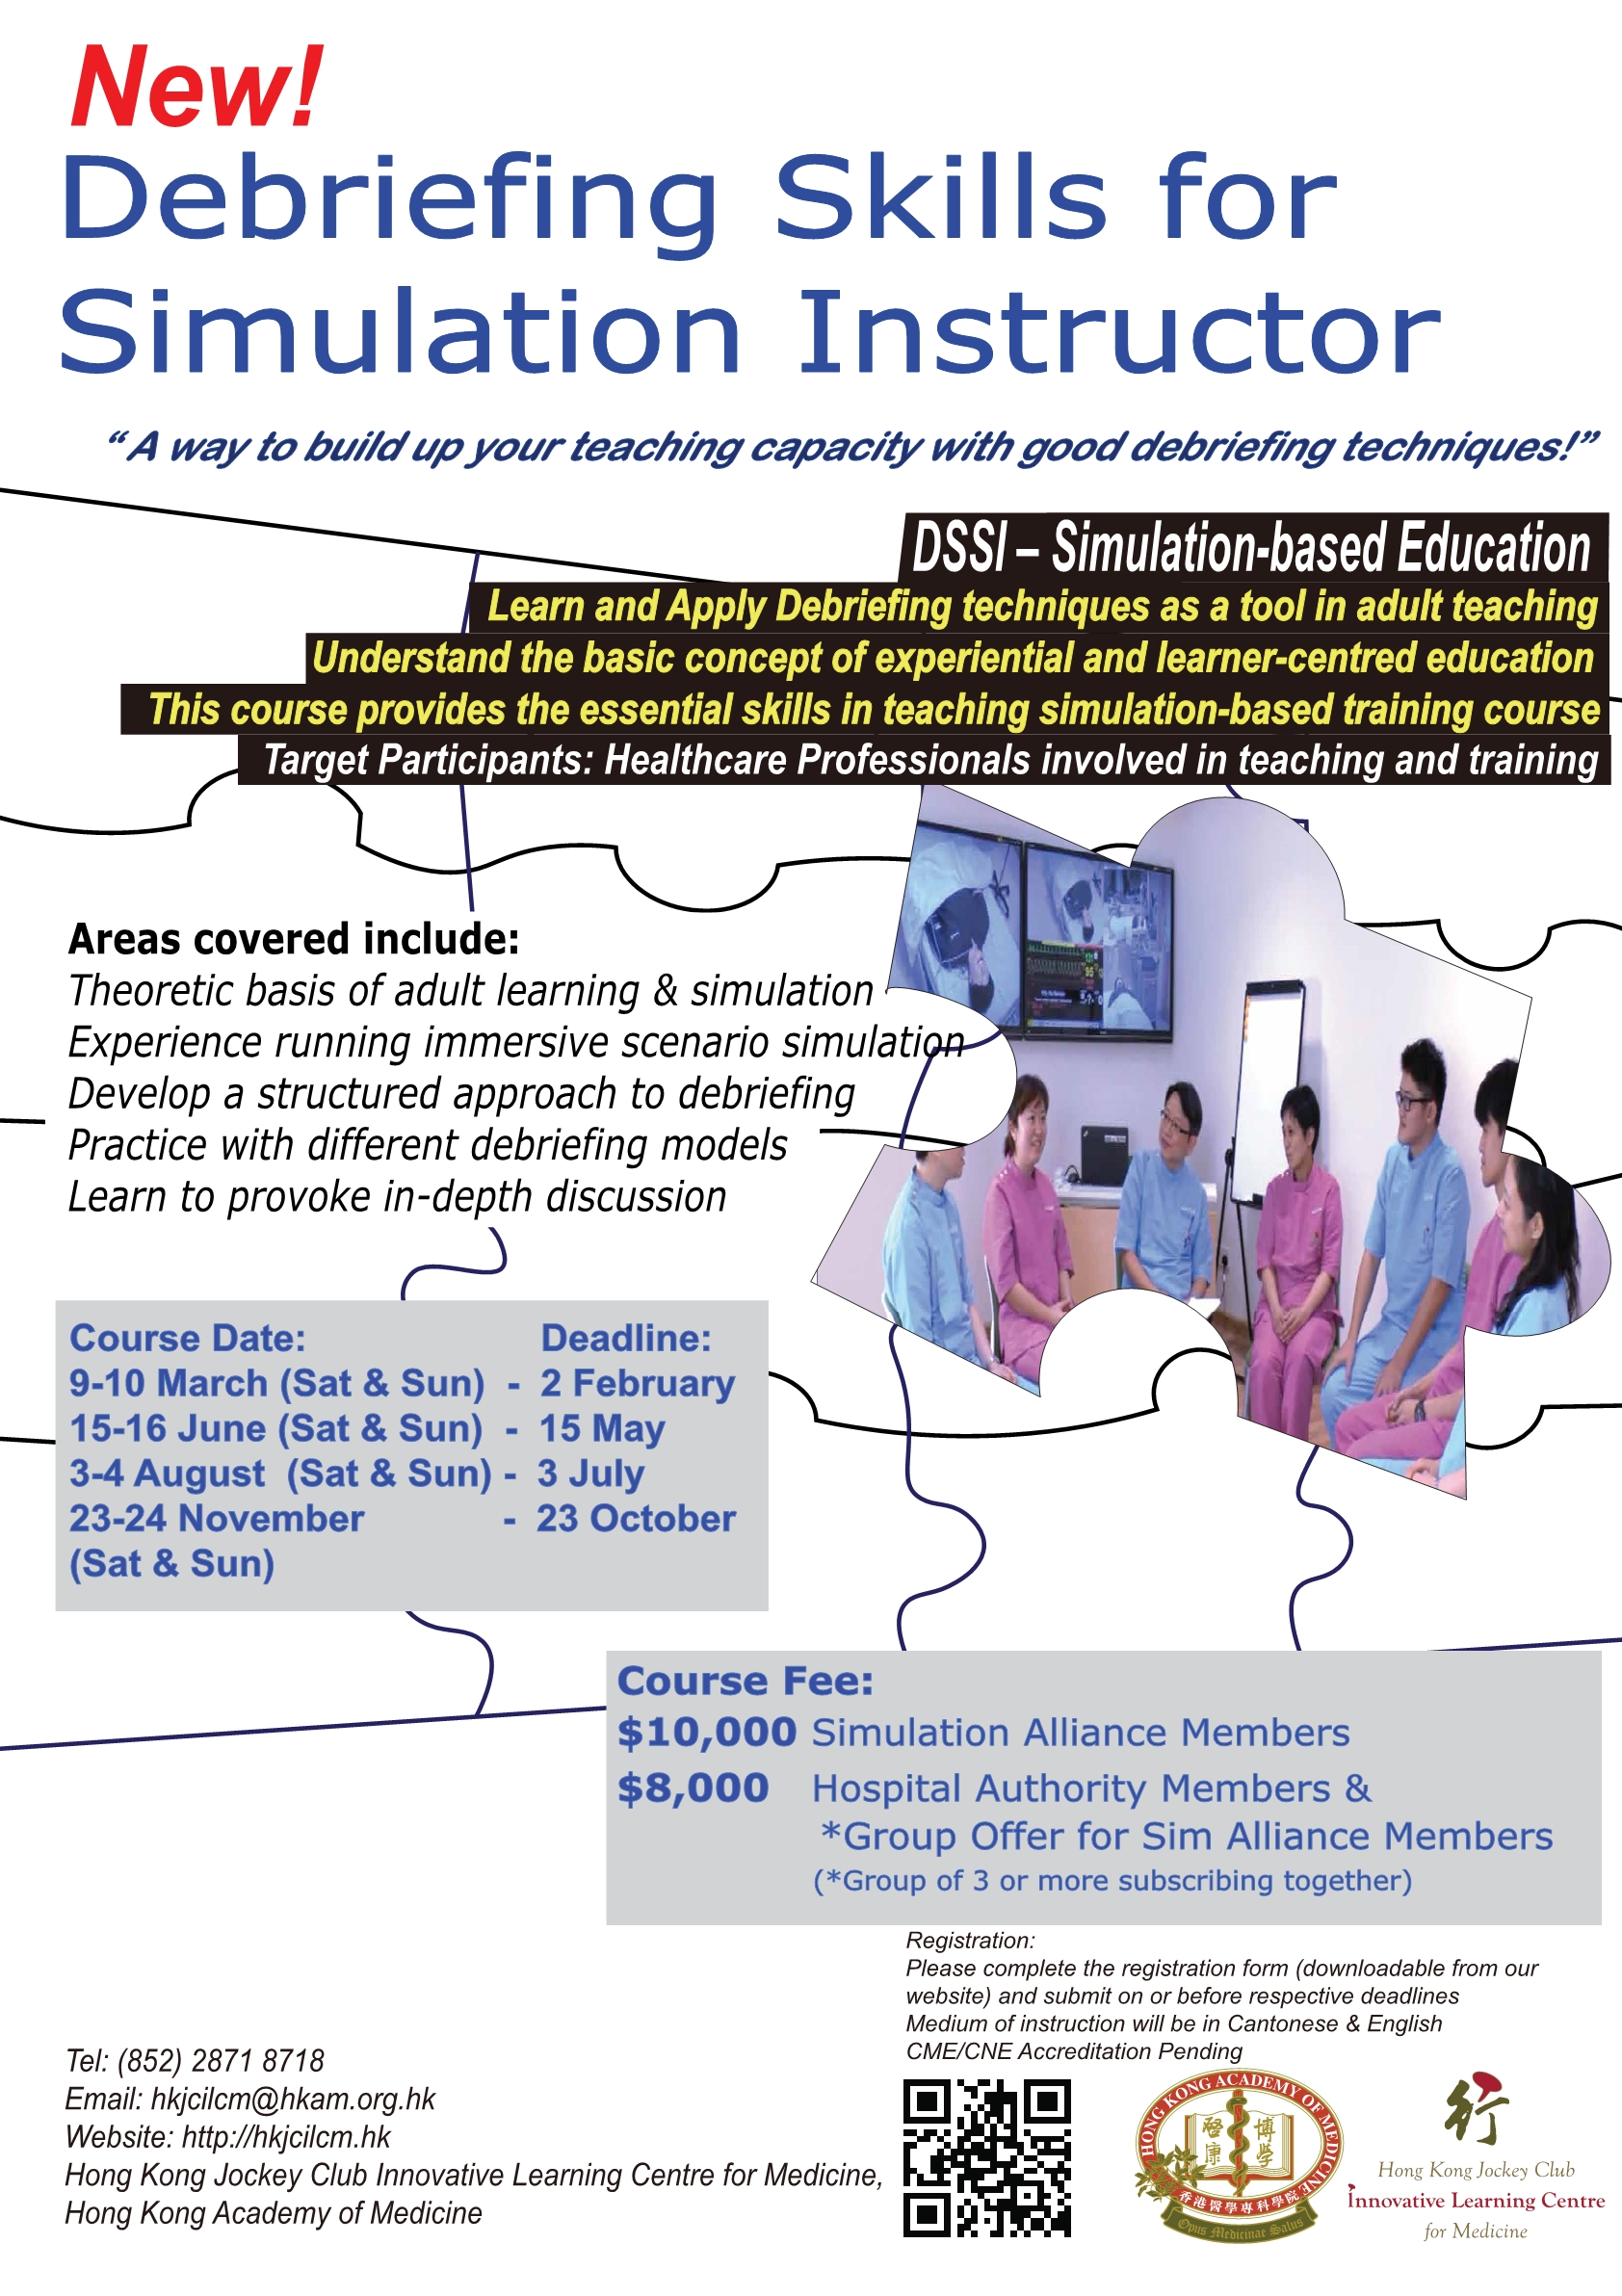 Debriefing Skills for Simulation Instructors Course (DSSIC)